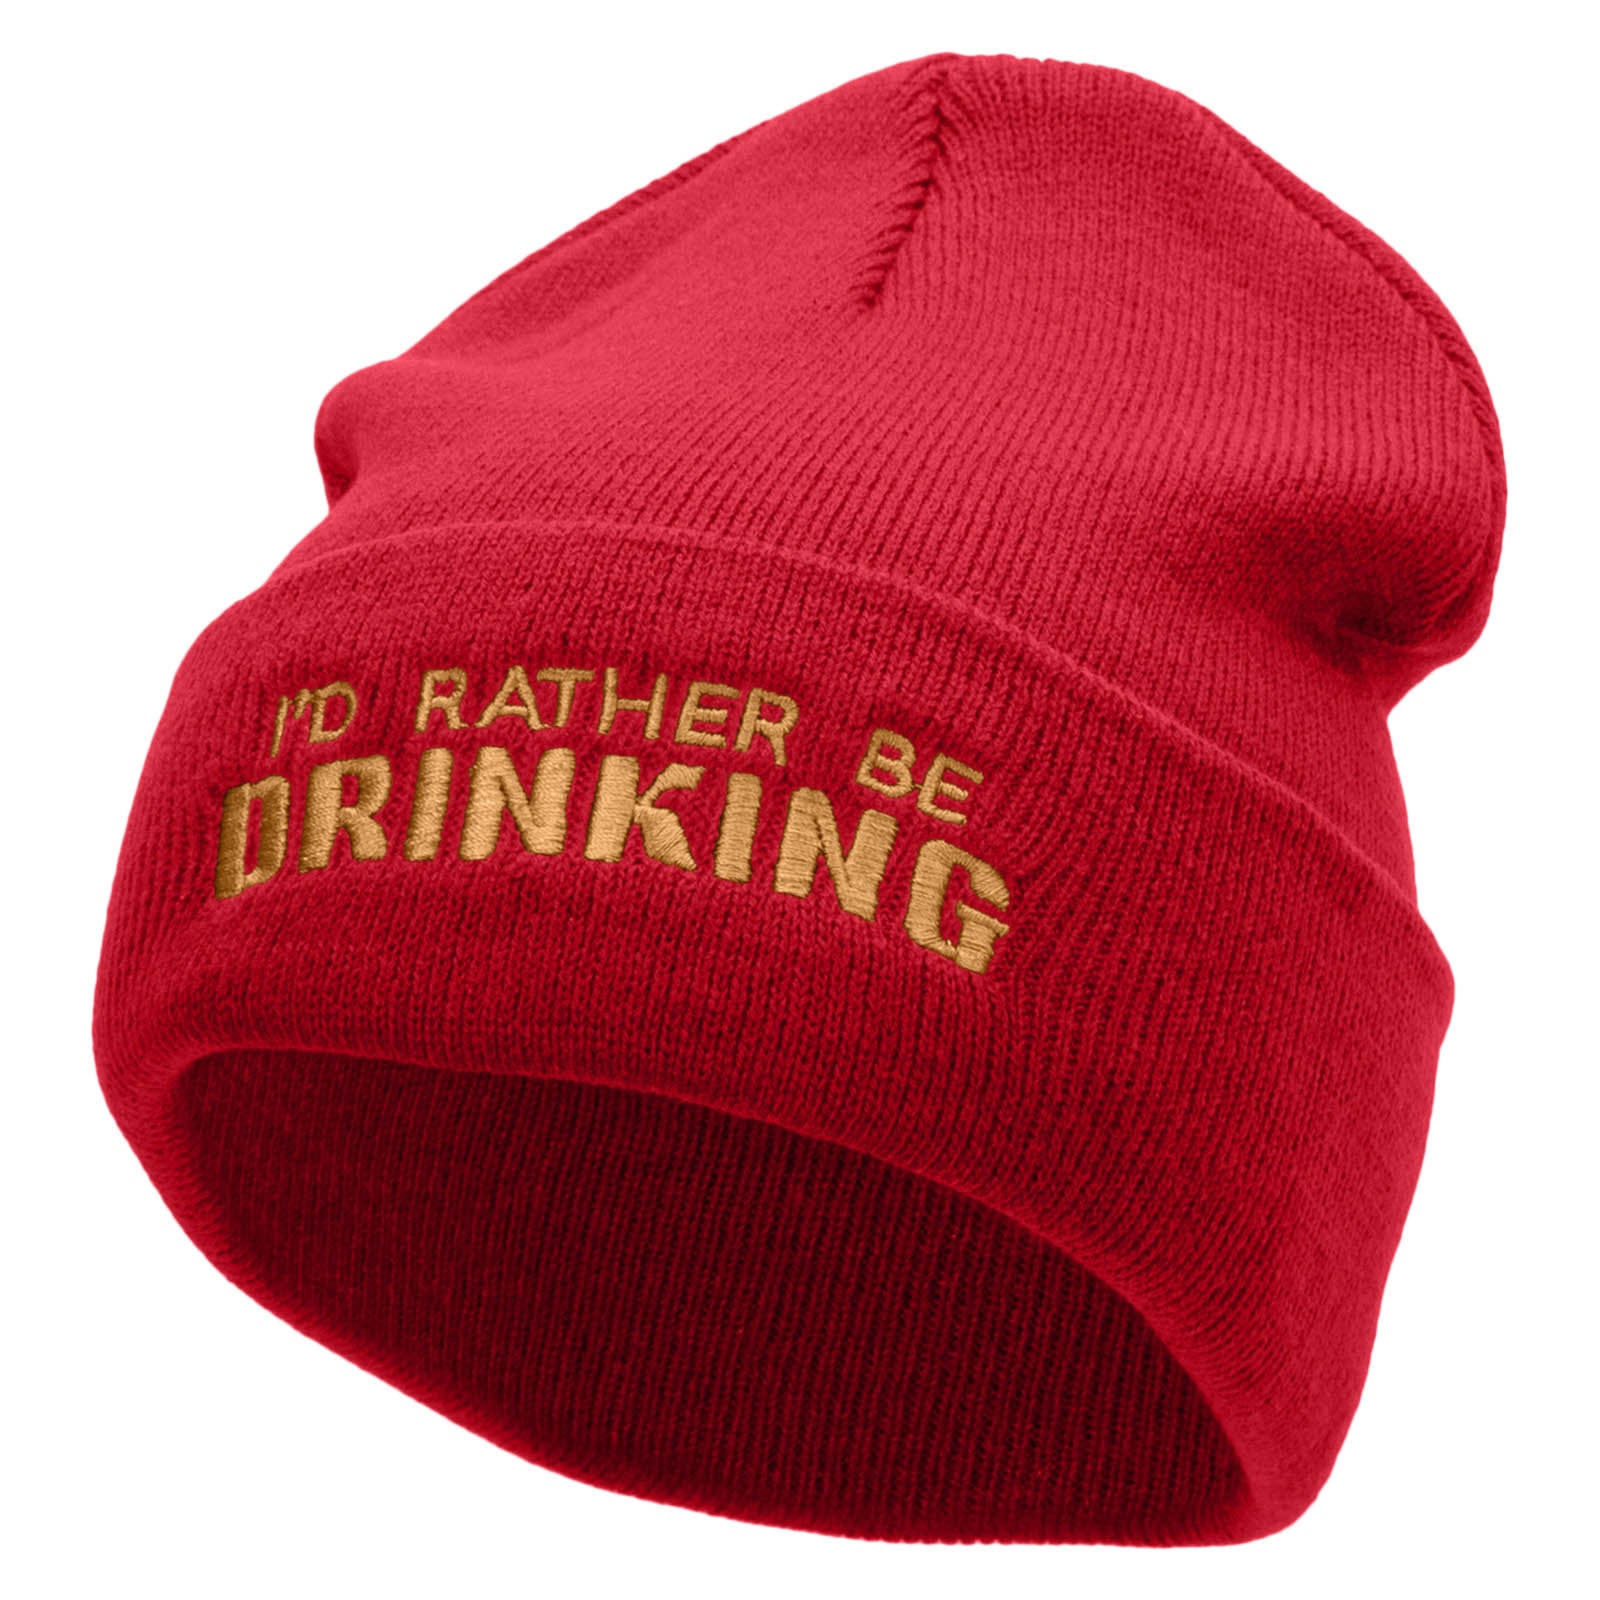 I &#039;d Rather Be Drinking Phrase Embroidered 12 Inch Long Knitted Beanie - Red OSFM